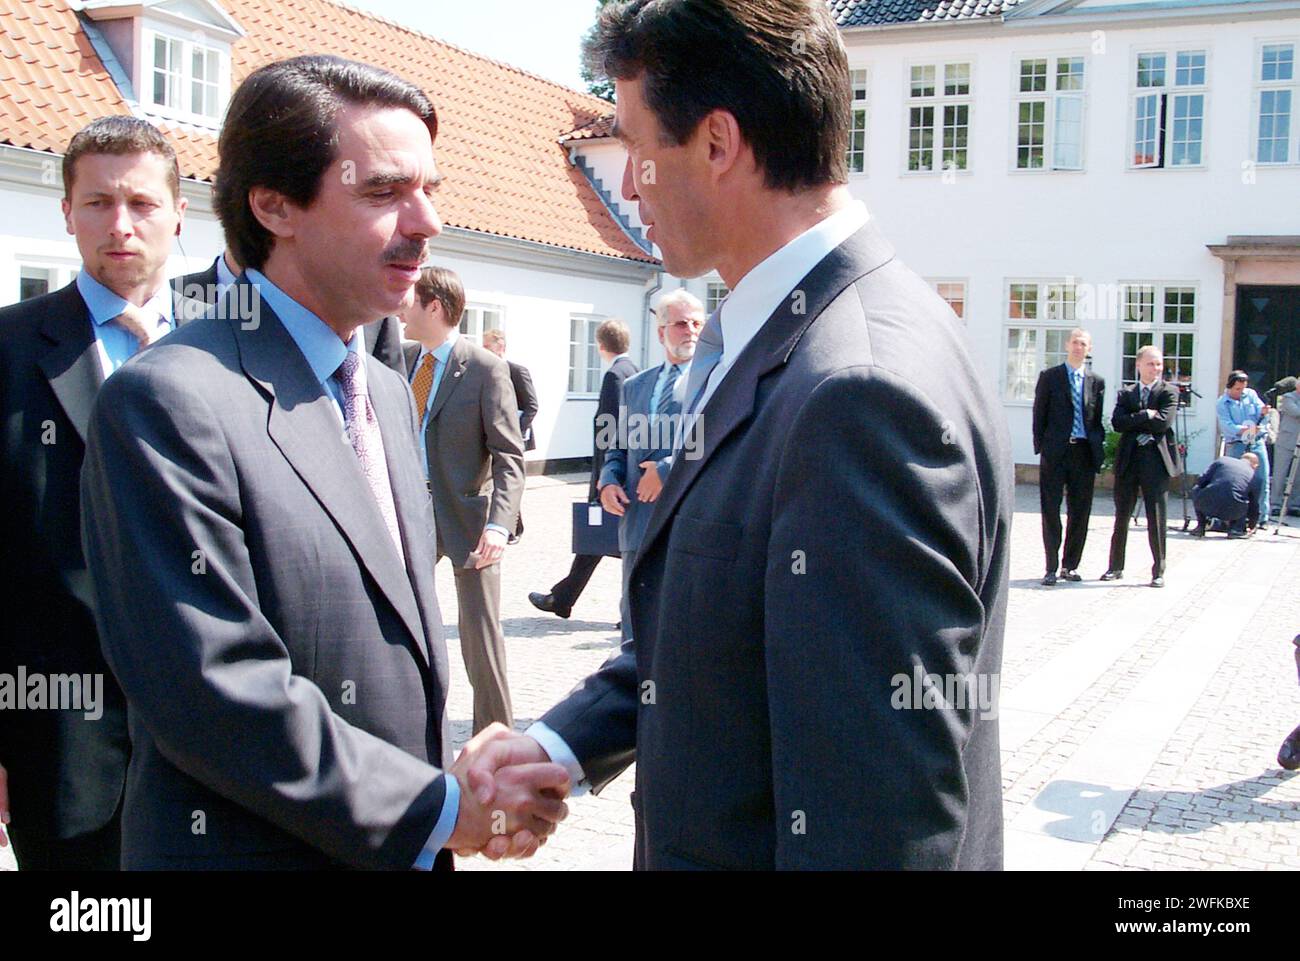 June 18,2002-Danish Prime minister Anders Fogh Rasmussen welcome Spanish Prime minister Jose Maria Aznar at Marienborg Lyngby,after talk bothe Prime minister hold joint press conference at Marienborg,Lyngby Denmark(Photo by Francis Dean/Dean Pictures) Stock Photo